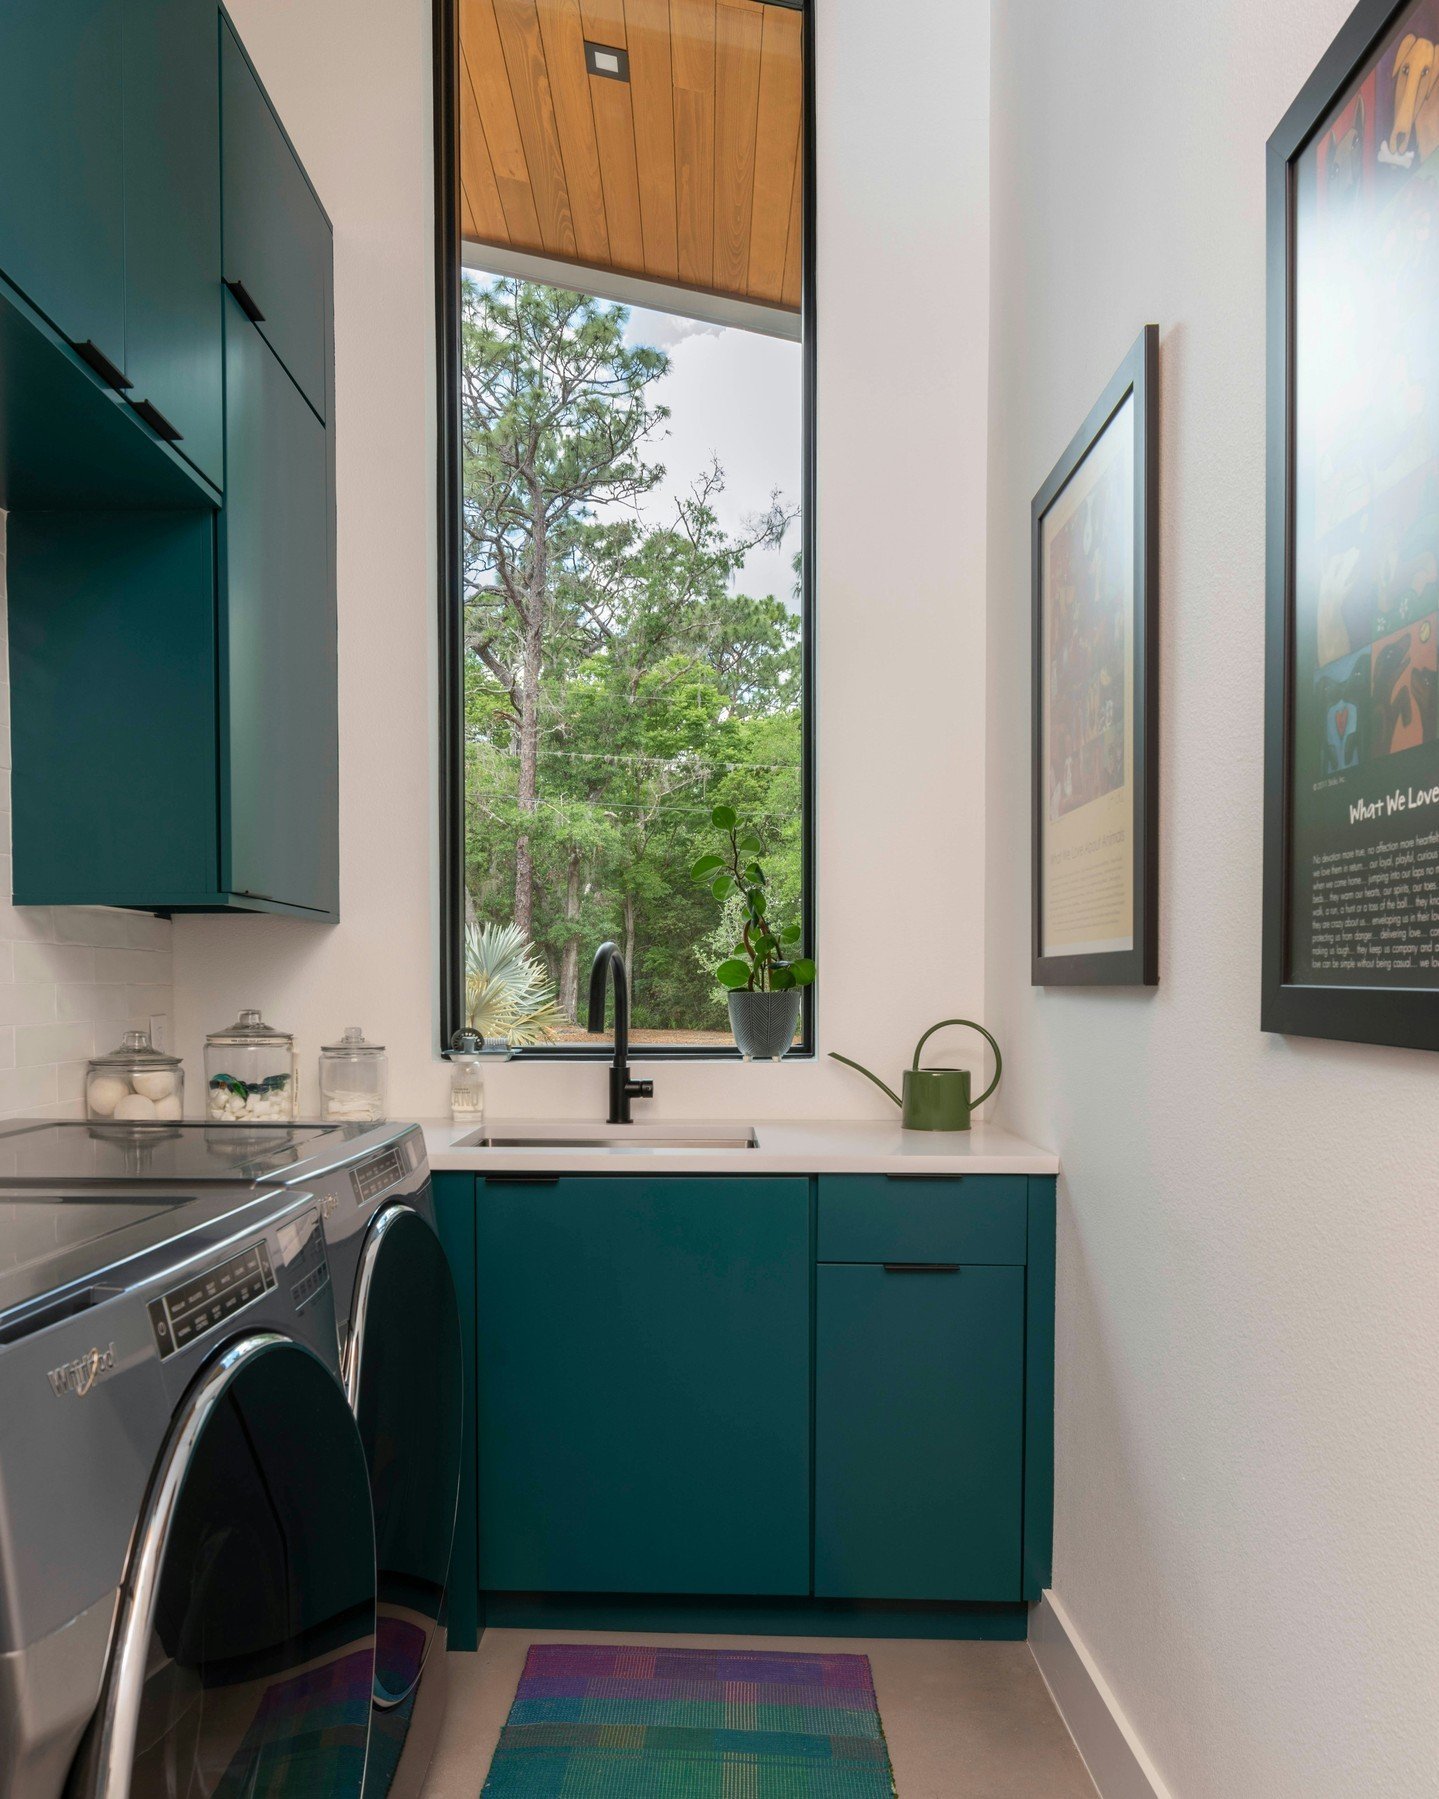 Who says laundry can't be a breath of fresh air? This light-filled laundry room, proves that chores can be a delight. 💫

The expansive window was strategically placed to flood the room with natural light and tranquil views of nature. 🌿 Even the mos